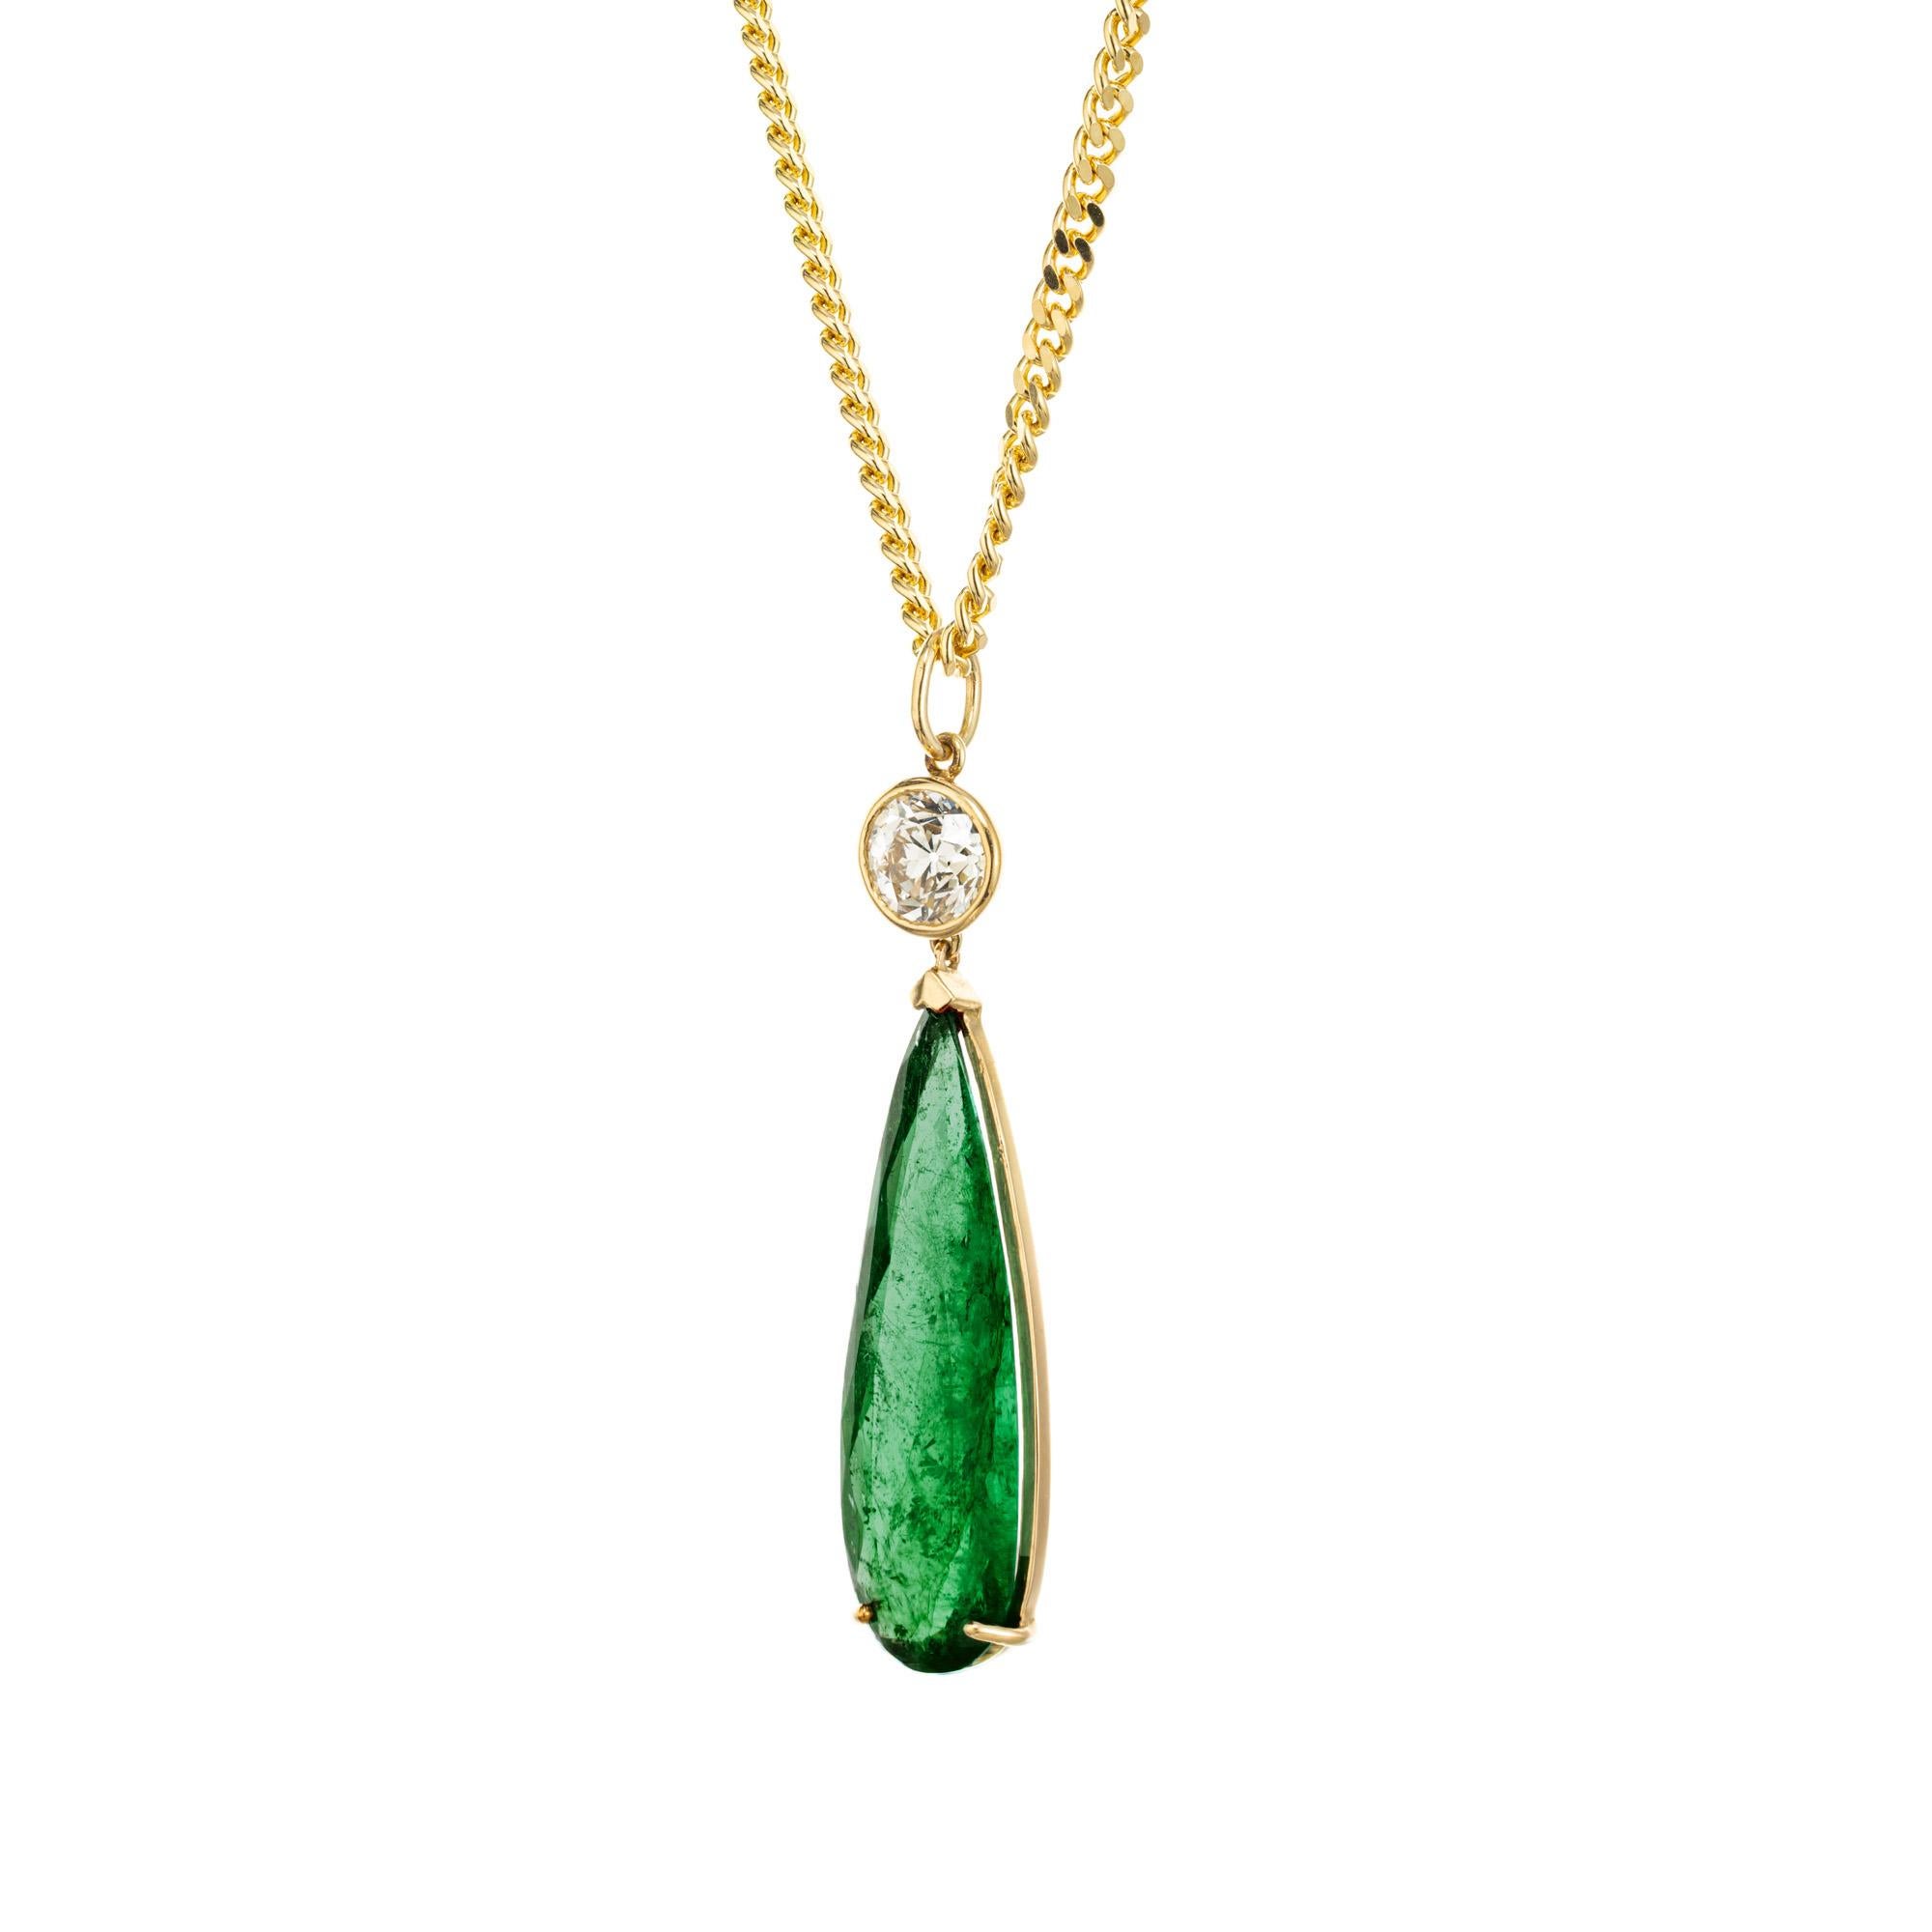 Emerald and diamond pendant necklace. GIA certified 10.09ct natural Emerald moderate clarity enhancement only elongated pear shape in a handmade 18k yellow gold setting with a 1.11ct old European cut bezel set diamond.  circa 1920 - 1930. 20 inch